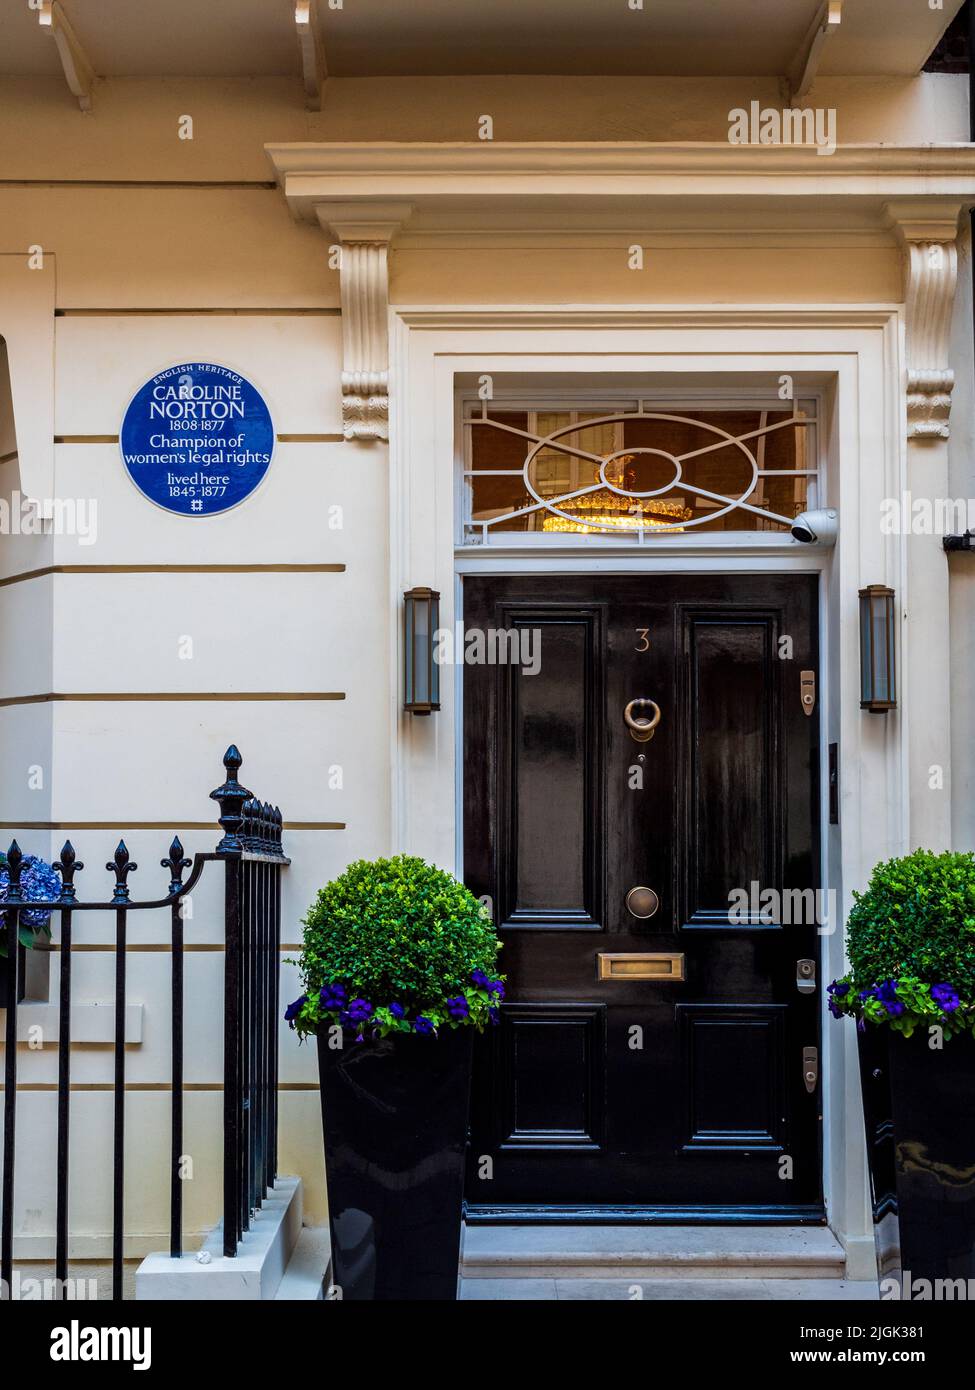 Caroline Norton Blue Plaque at 3 Chesterfield Street, Mayfair, London CAROLINE NORTON 1808–1877 Champion of women's legal rights lived here 1845–1877 Stock Photo